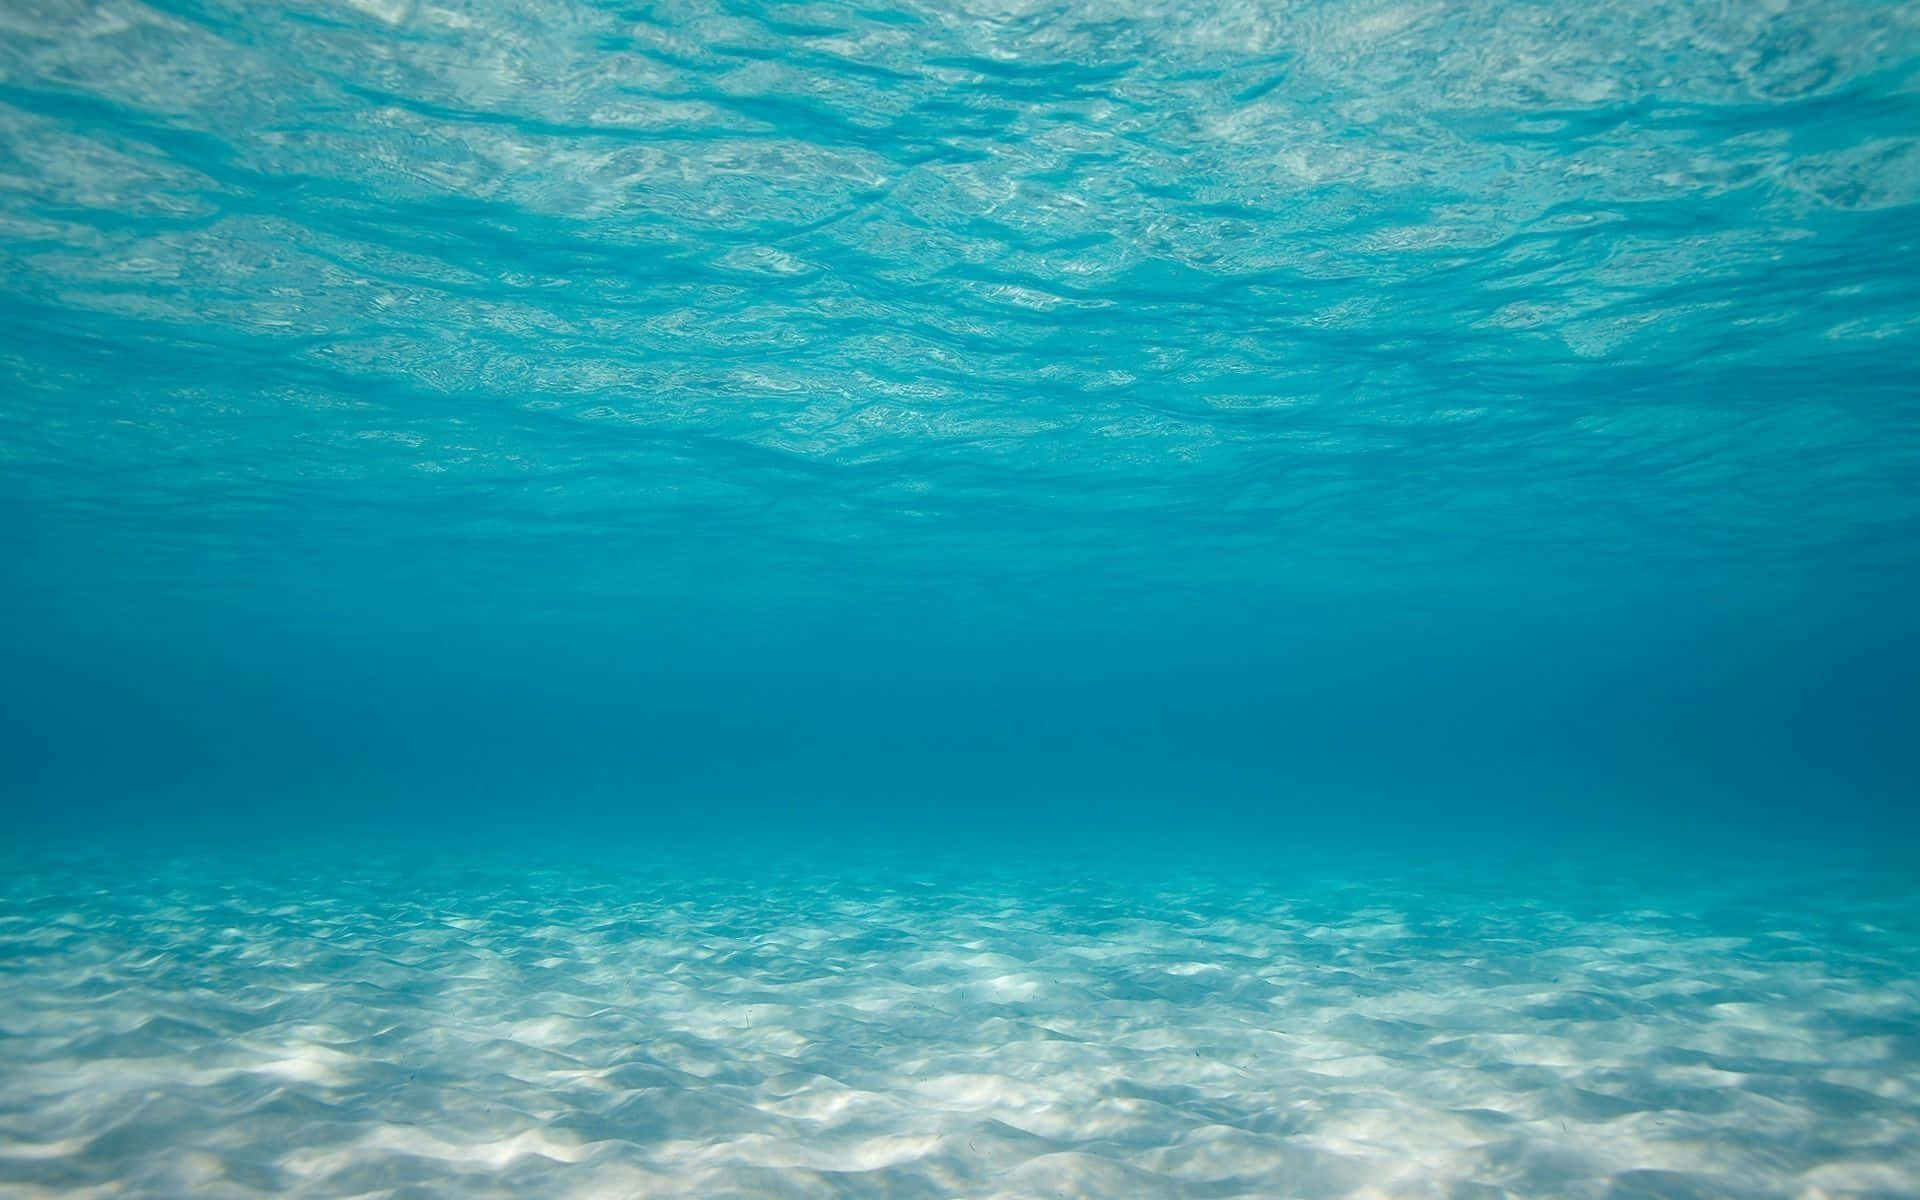 A stunning view of the endless blue ocean